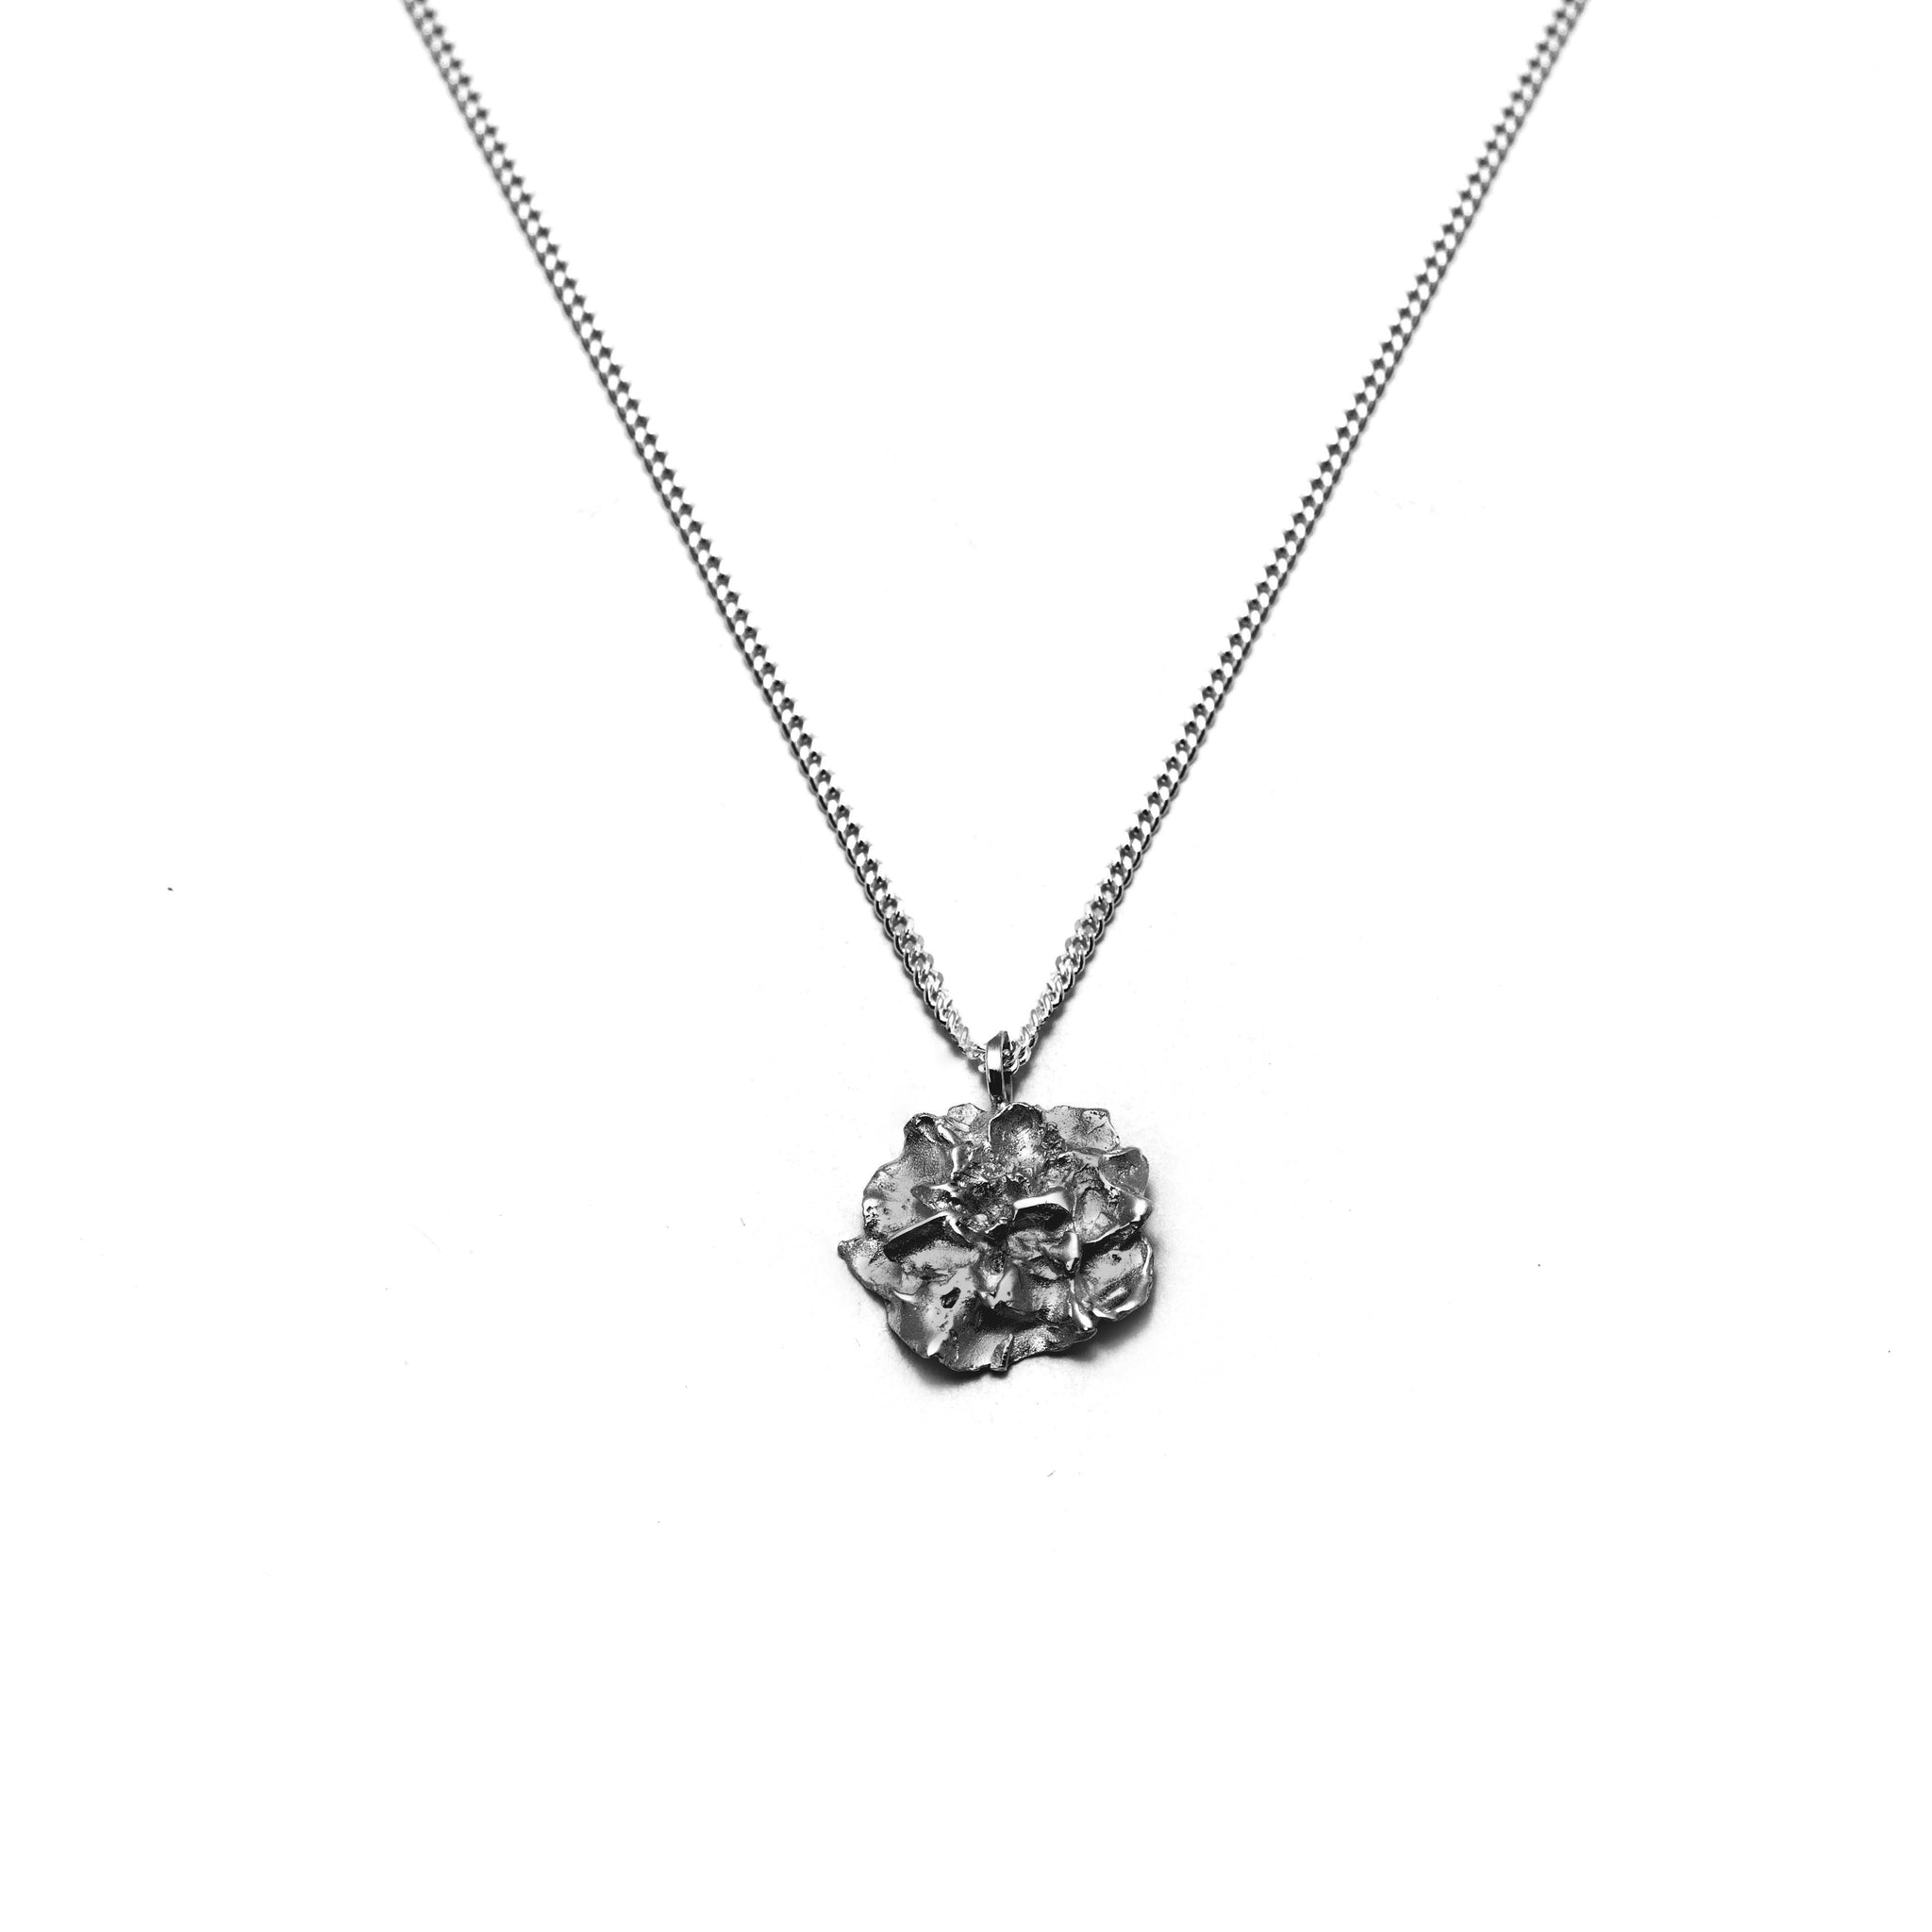 Oxidised Hedgerow Flower Drop necklace on white background